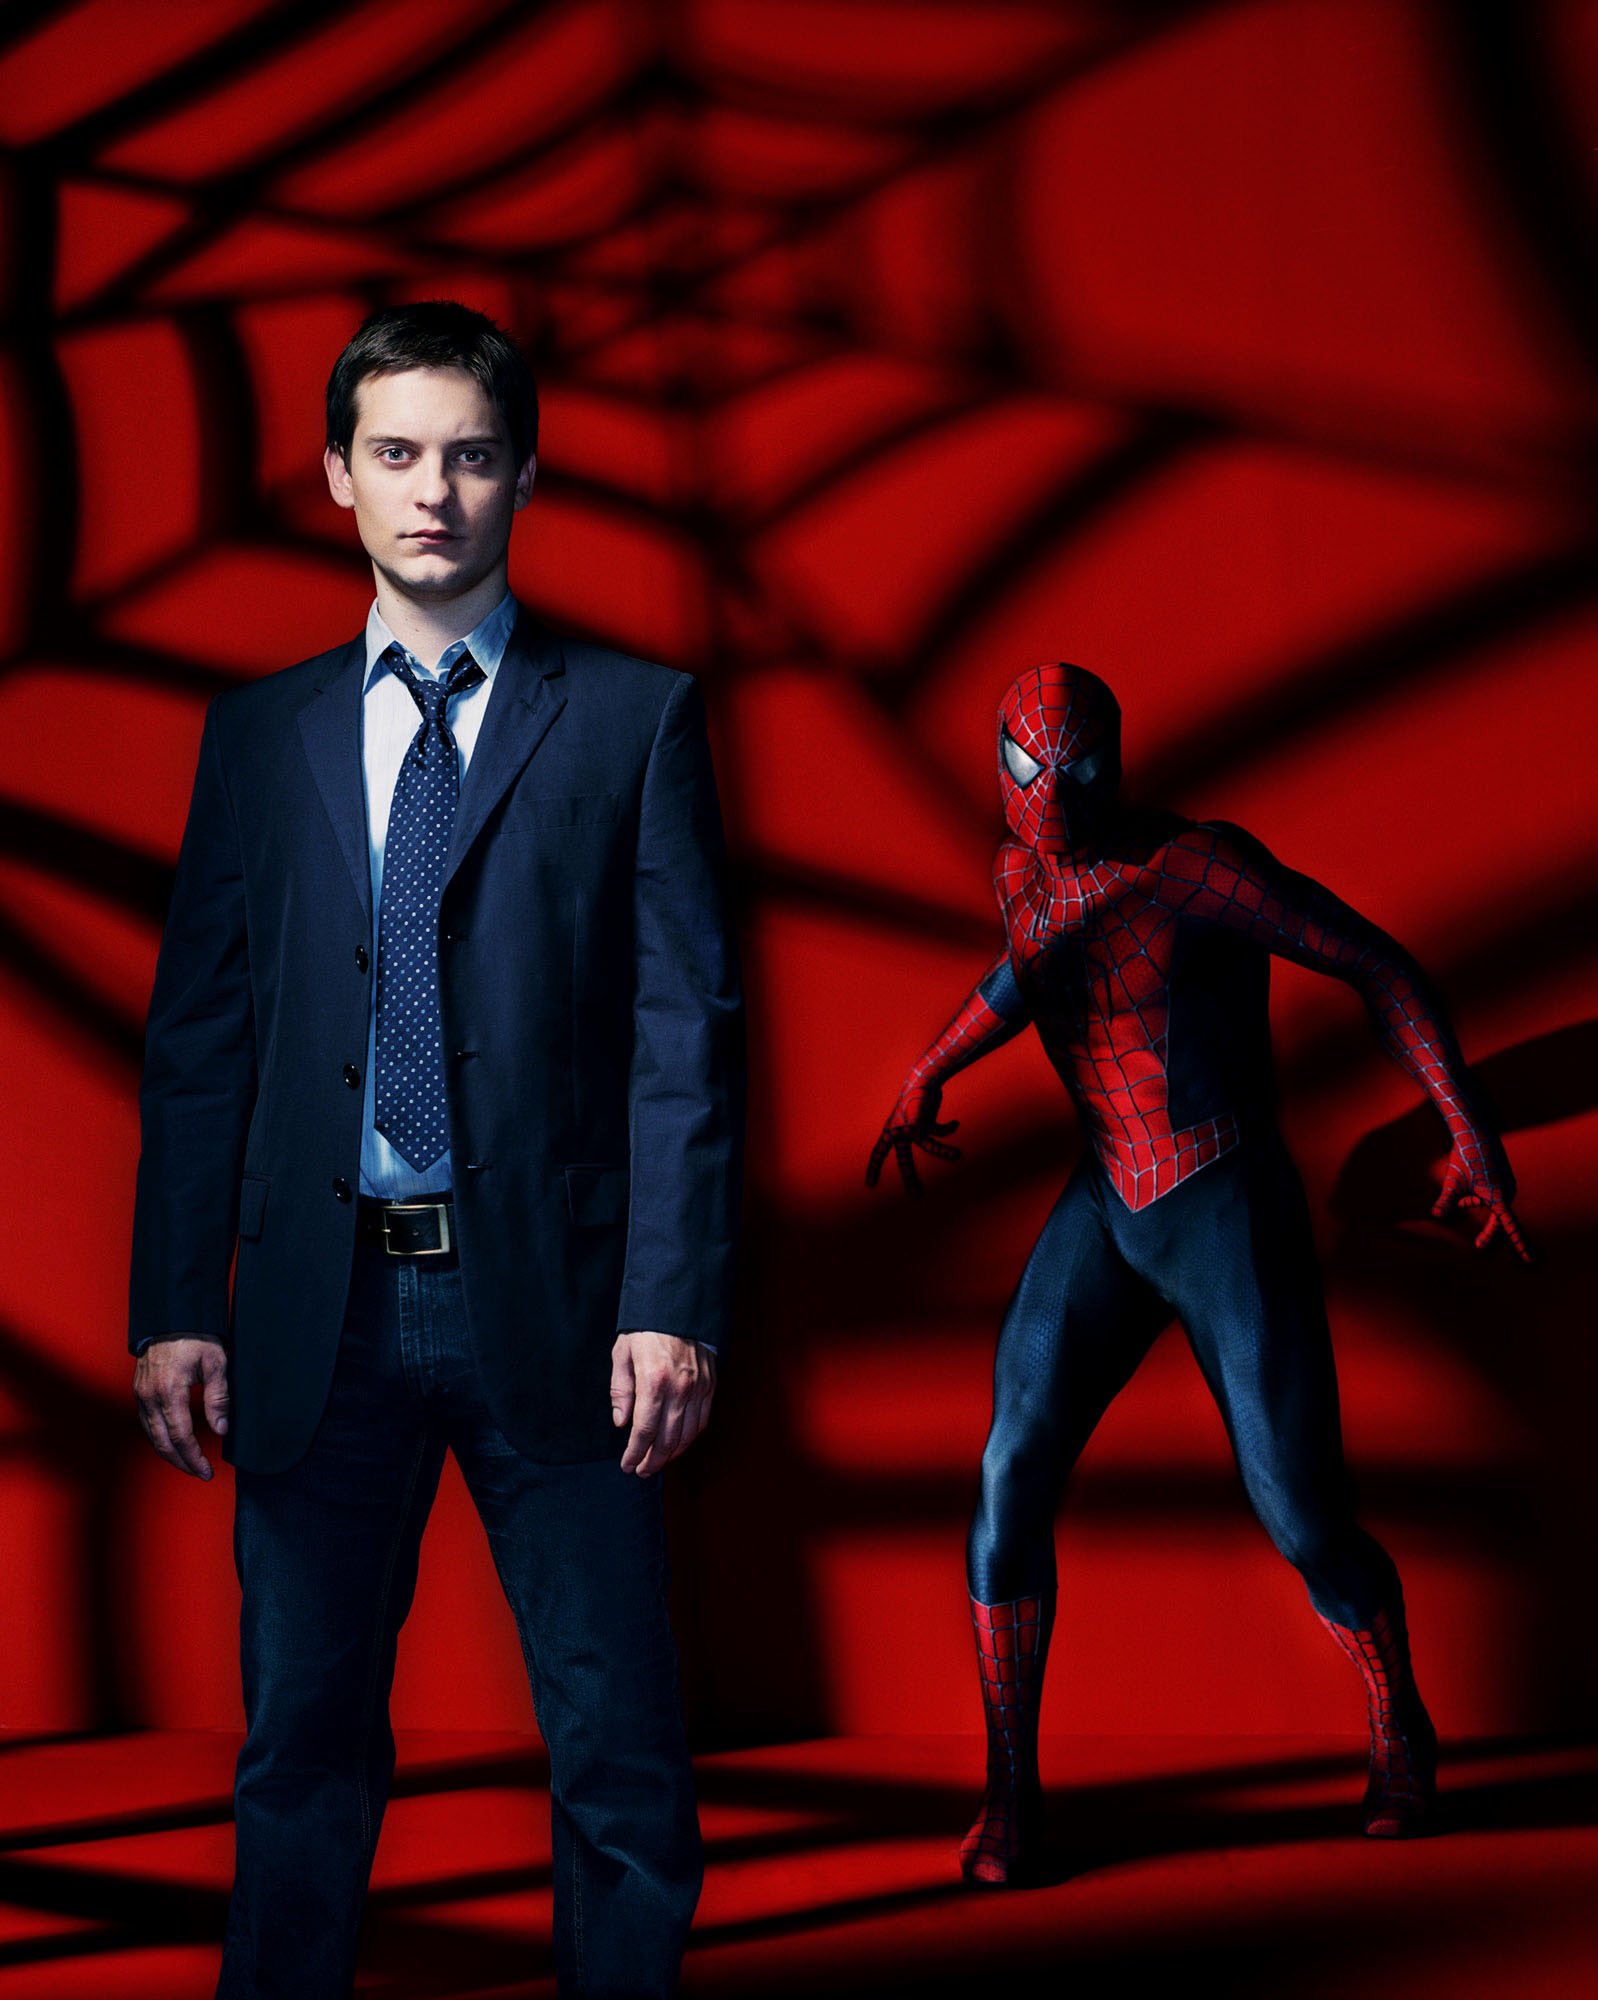 39. Tobey Maguire Alongside Spider-Man in this Promotional Shot for Spider-Man...